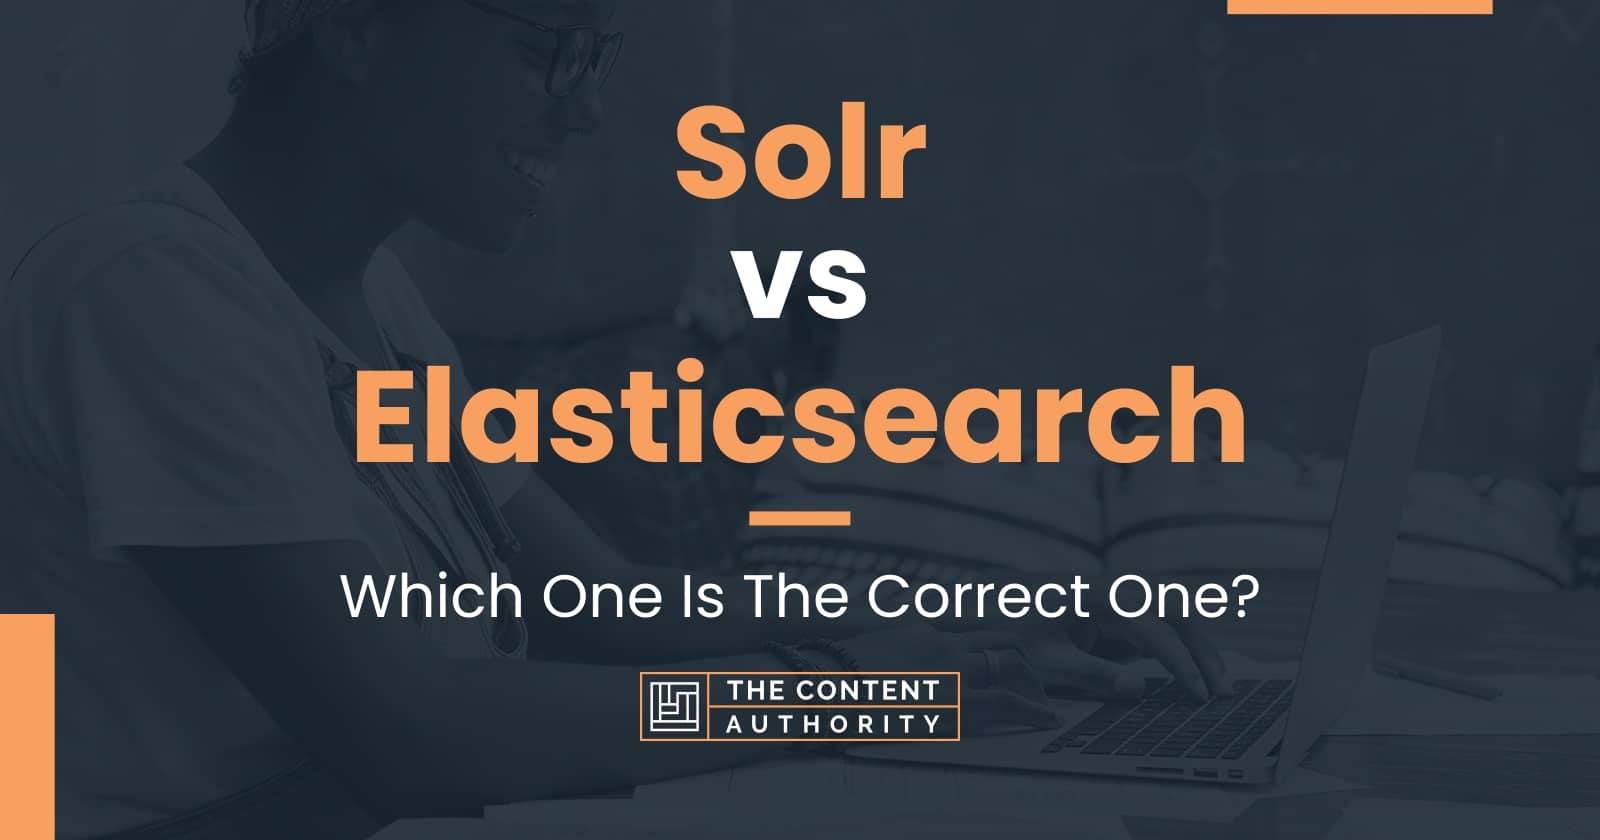 Solr vs Elasticsearch Which One Is The Correct One?